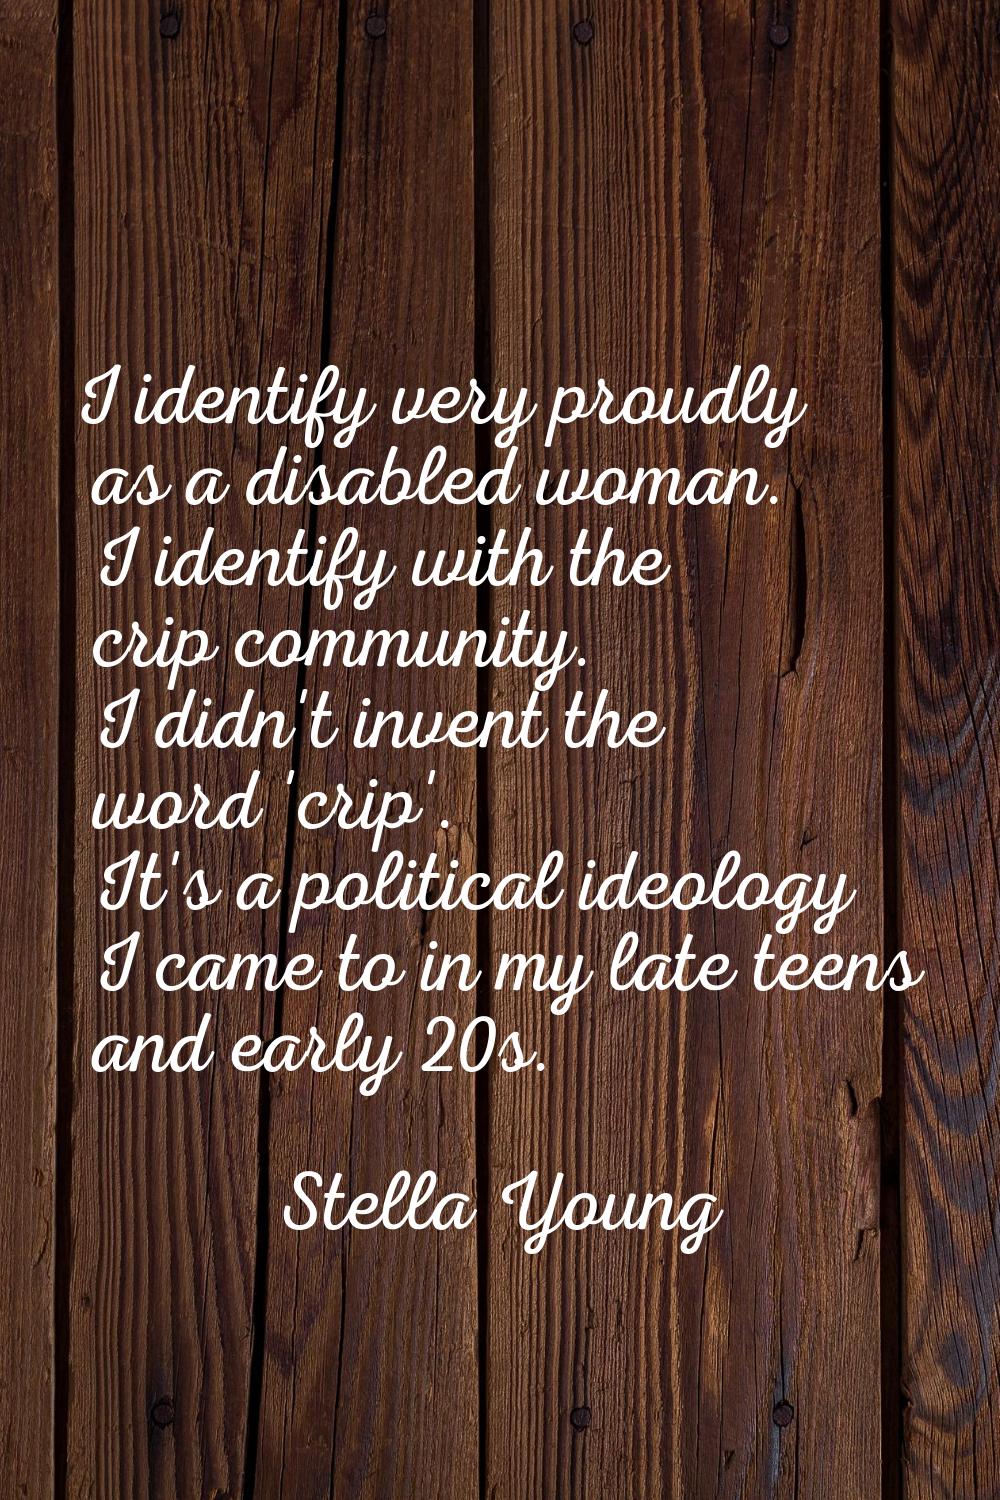 I identify very proudly as a disabled woman. I identify with the crip community. I didn't invent th